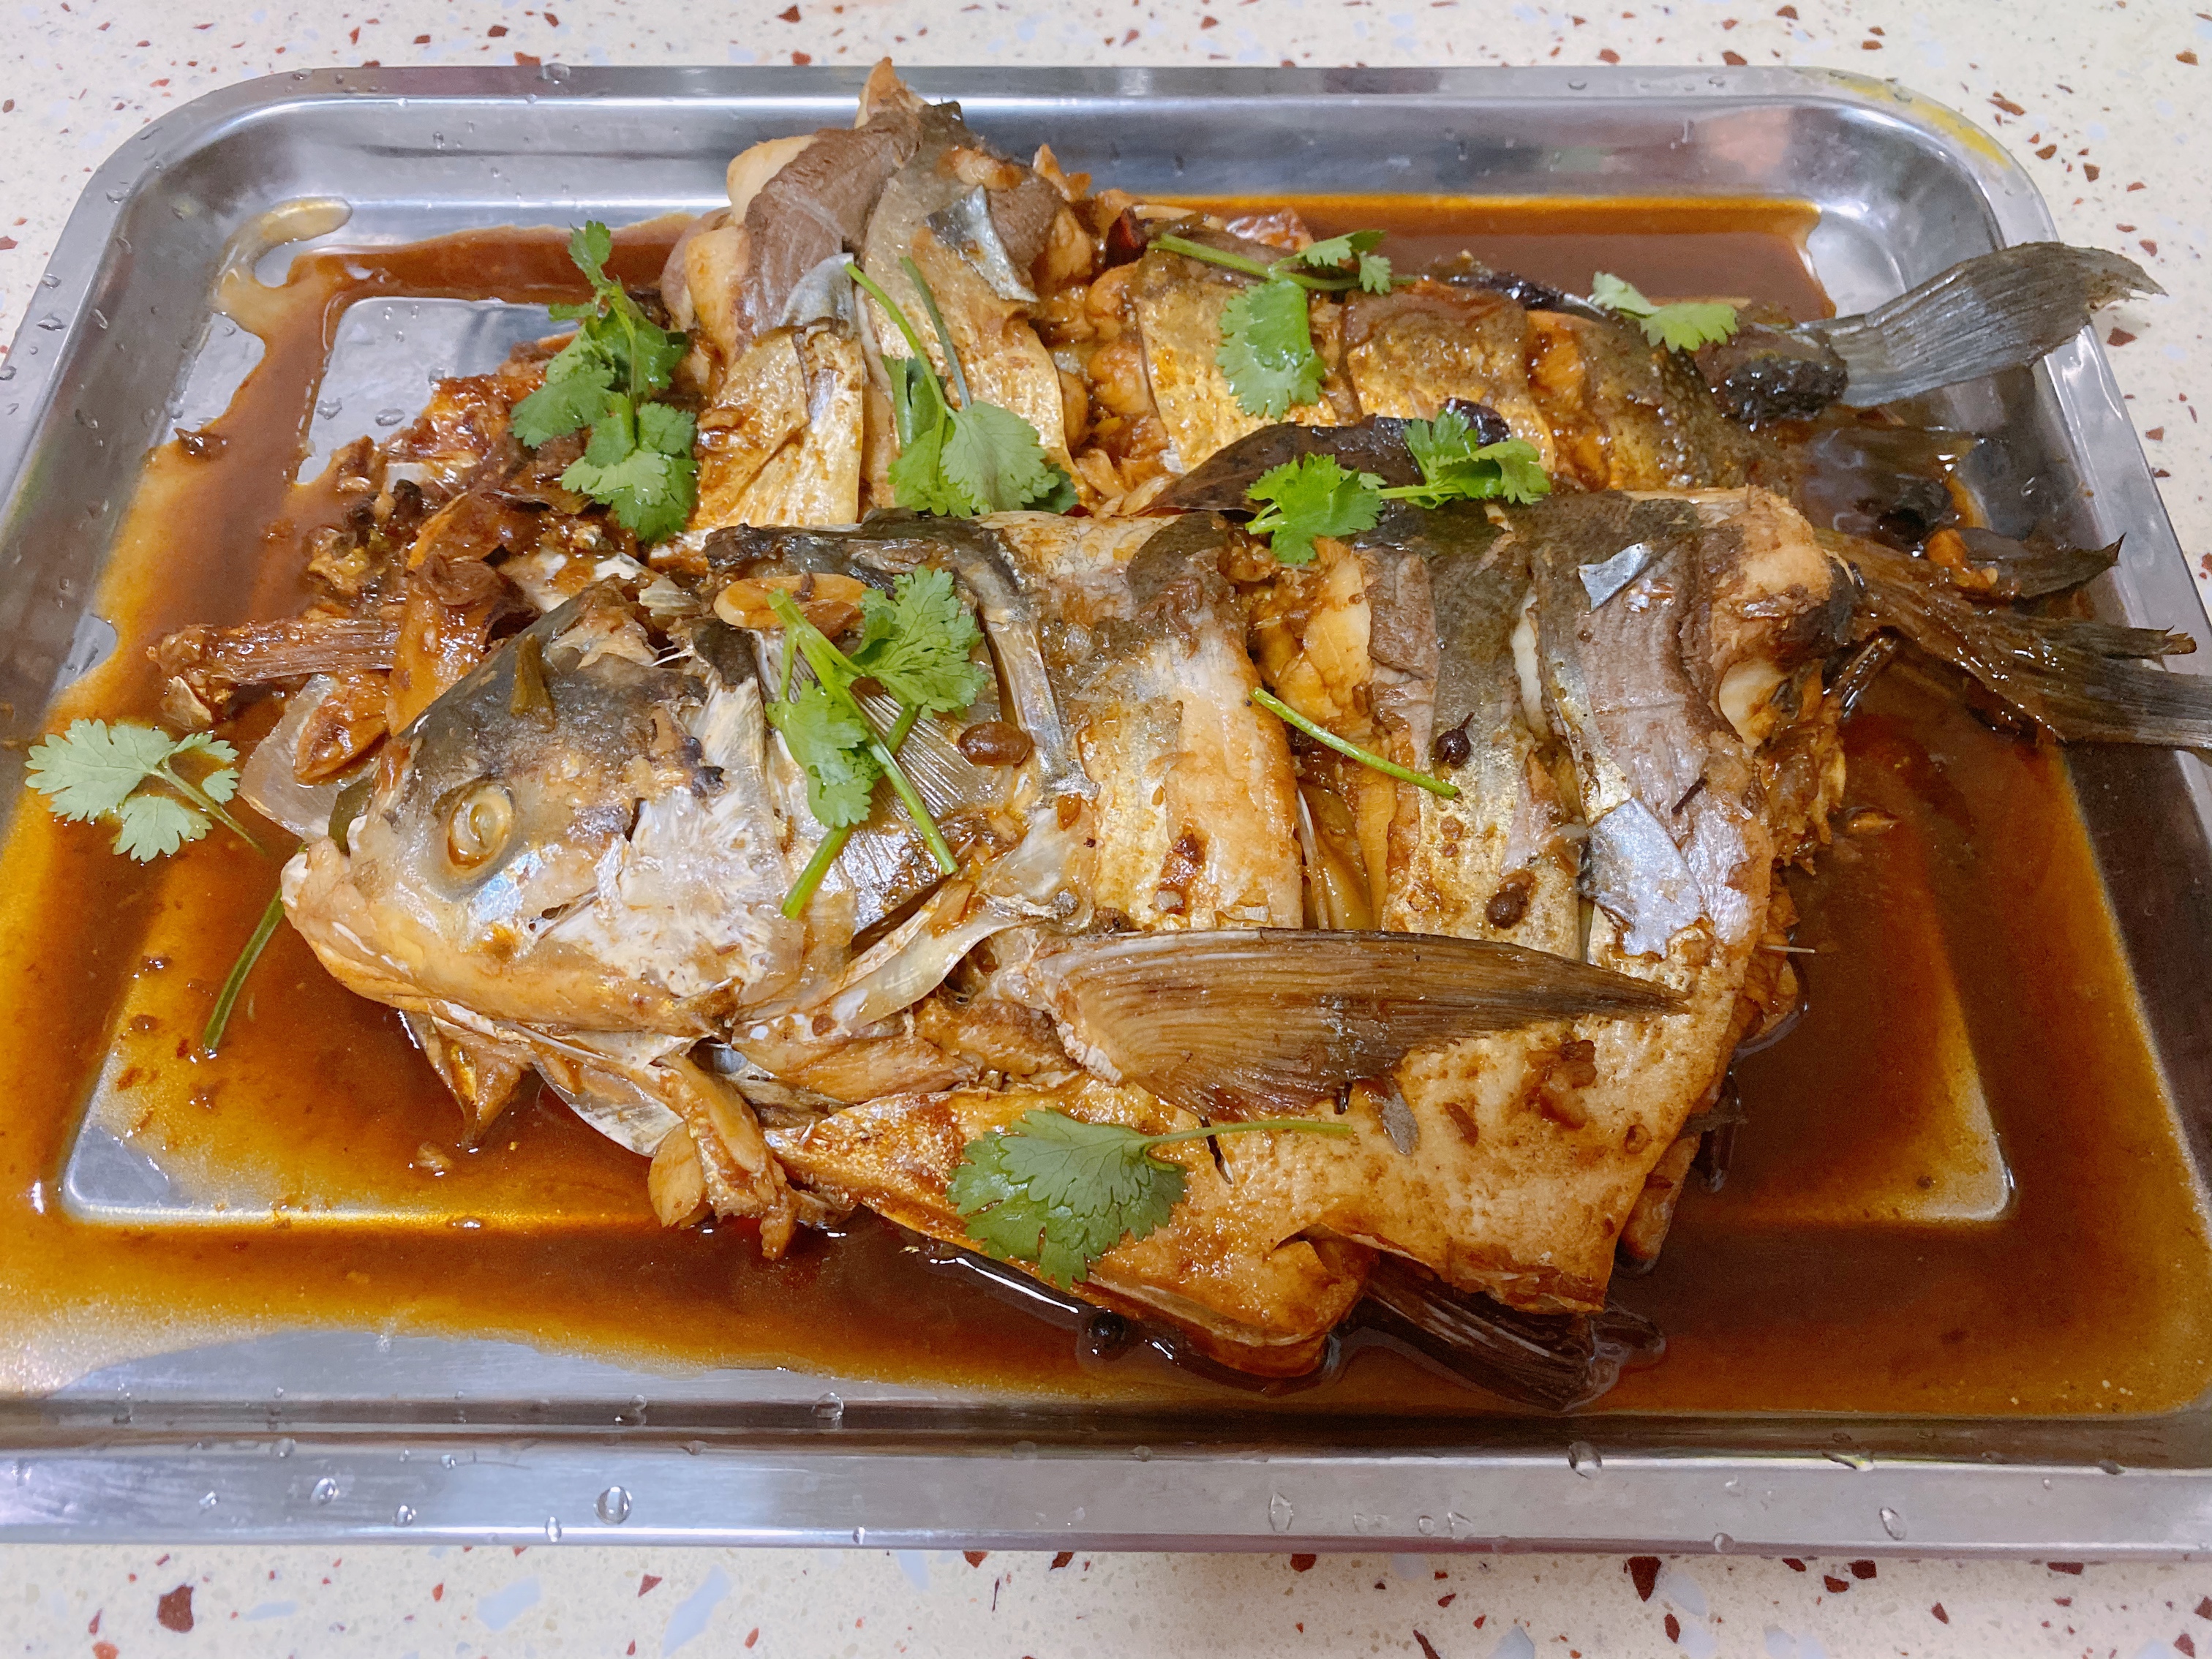 
The daily life of a family stews the practice of fish of braise in soy sauce of silver carp fish